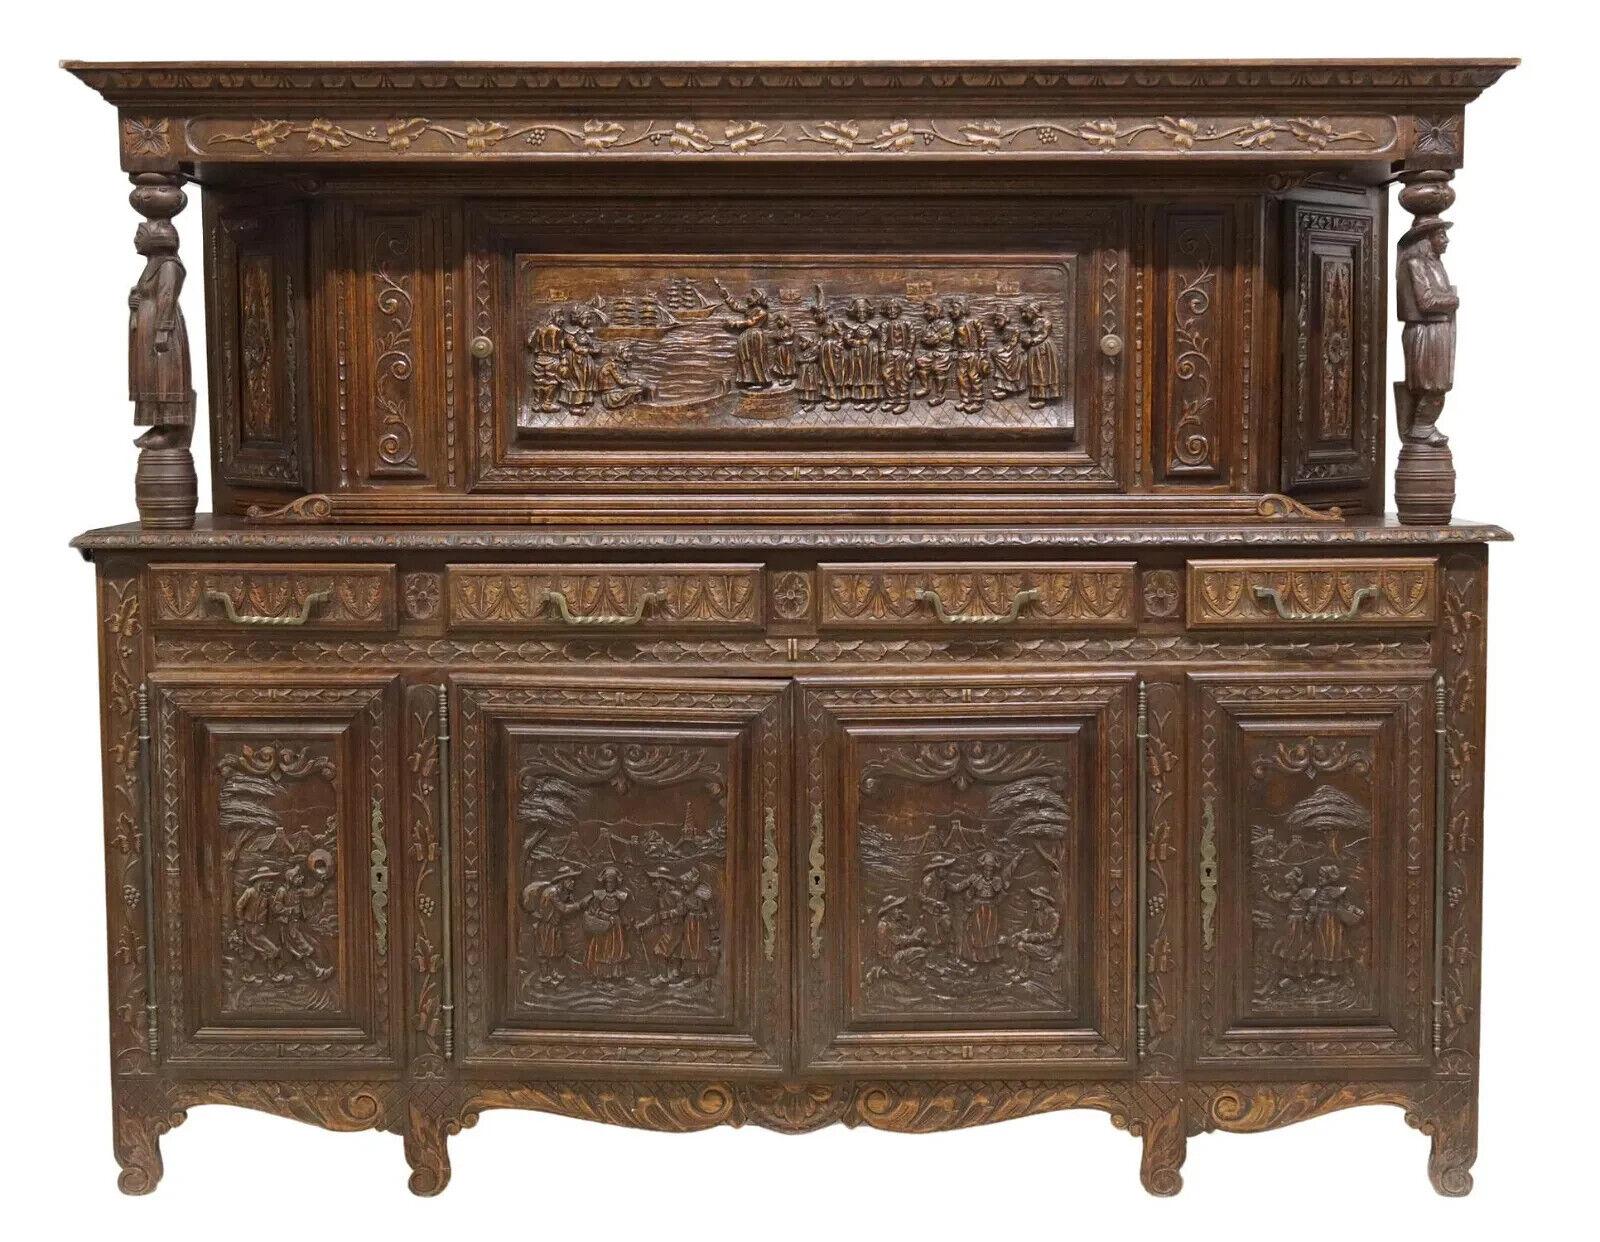 Gorgeous Antique Sideboard, French Breton, Figural, Carved, Oak, Drawers, Shelves, 19th Century, 1800s!!  Check for matching table and chairs!

French carved oak sideboard, Brittany, 19th c., the whole carved with figural scenes and running